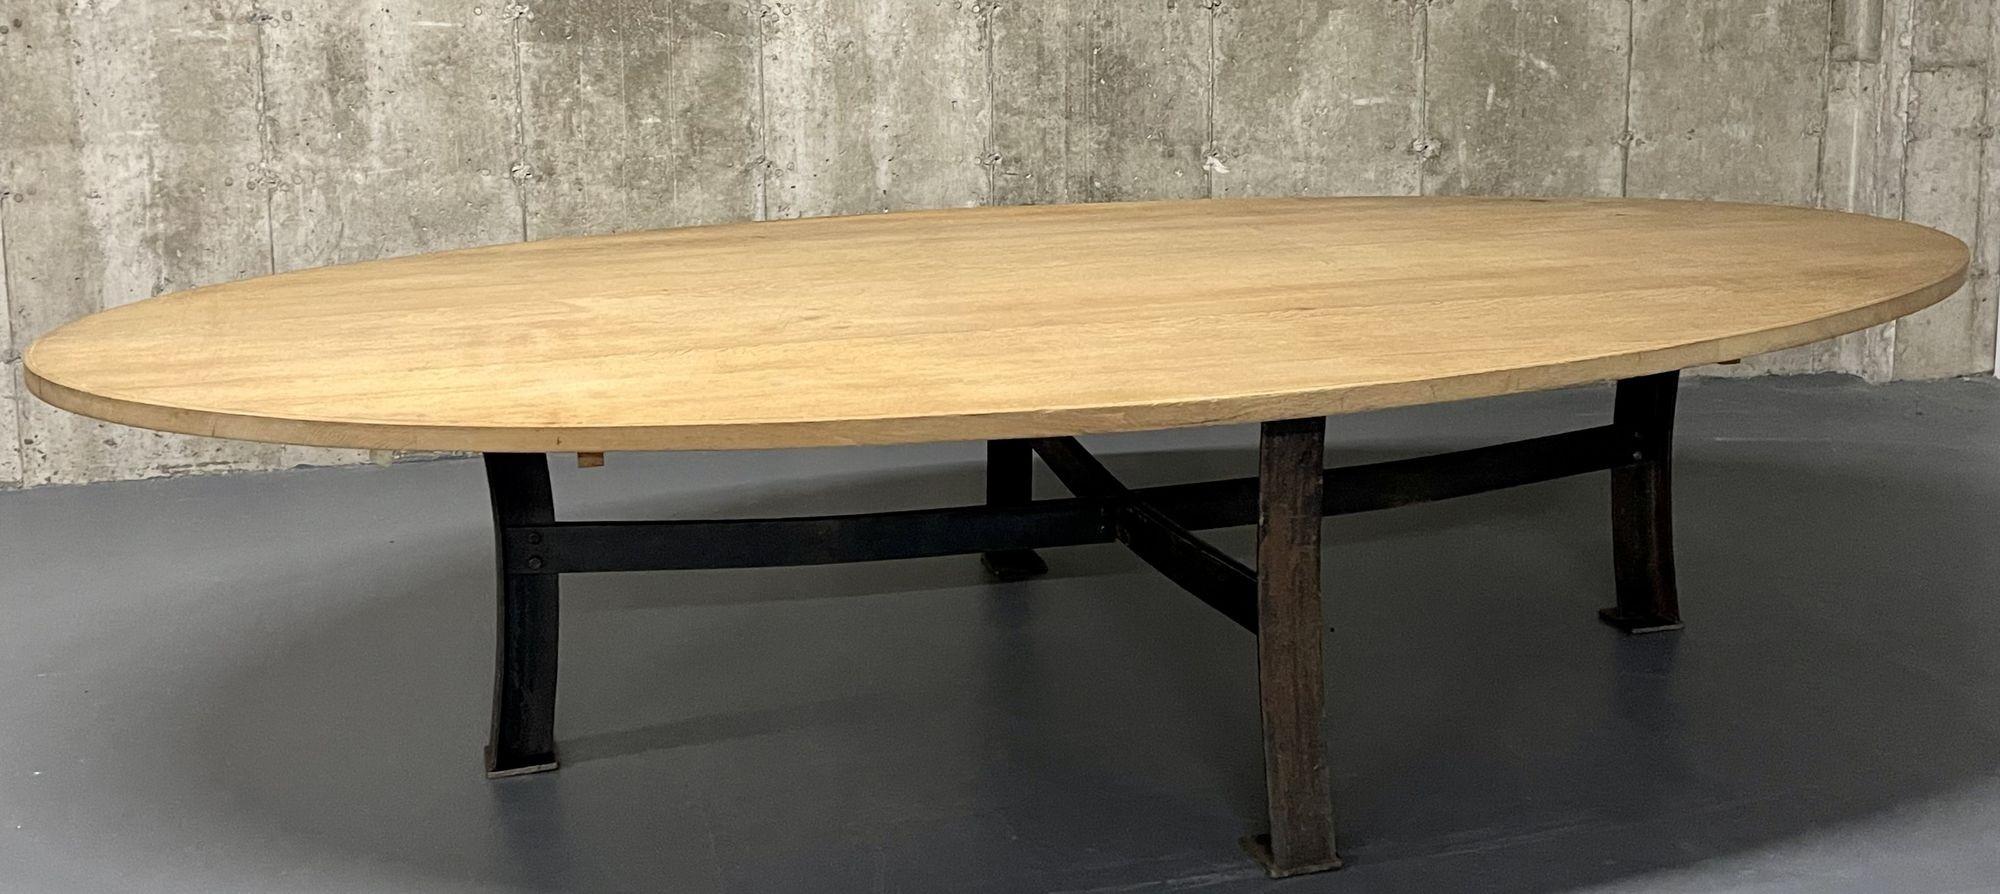 Mid Century Monumental Industrial Dining, Conference Table, Oak, Steel, American In Good Condition For Sale In Stamford, CT